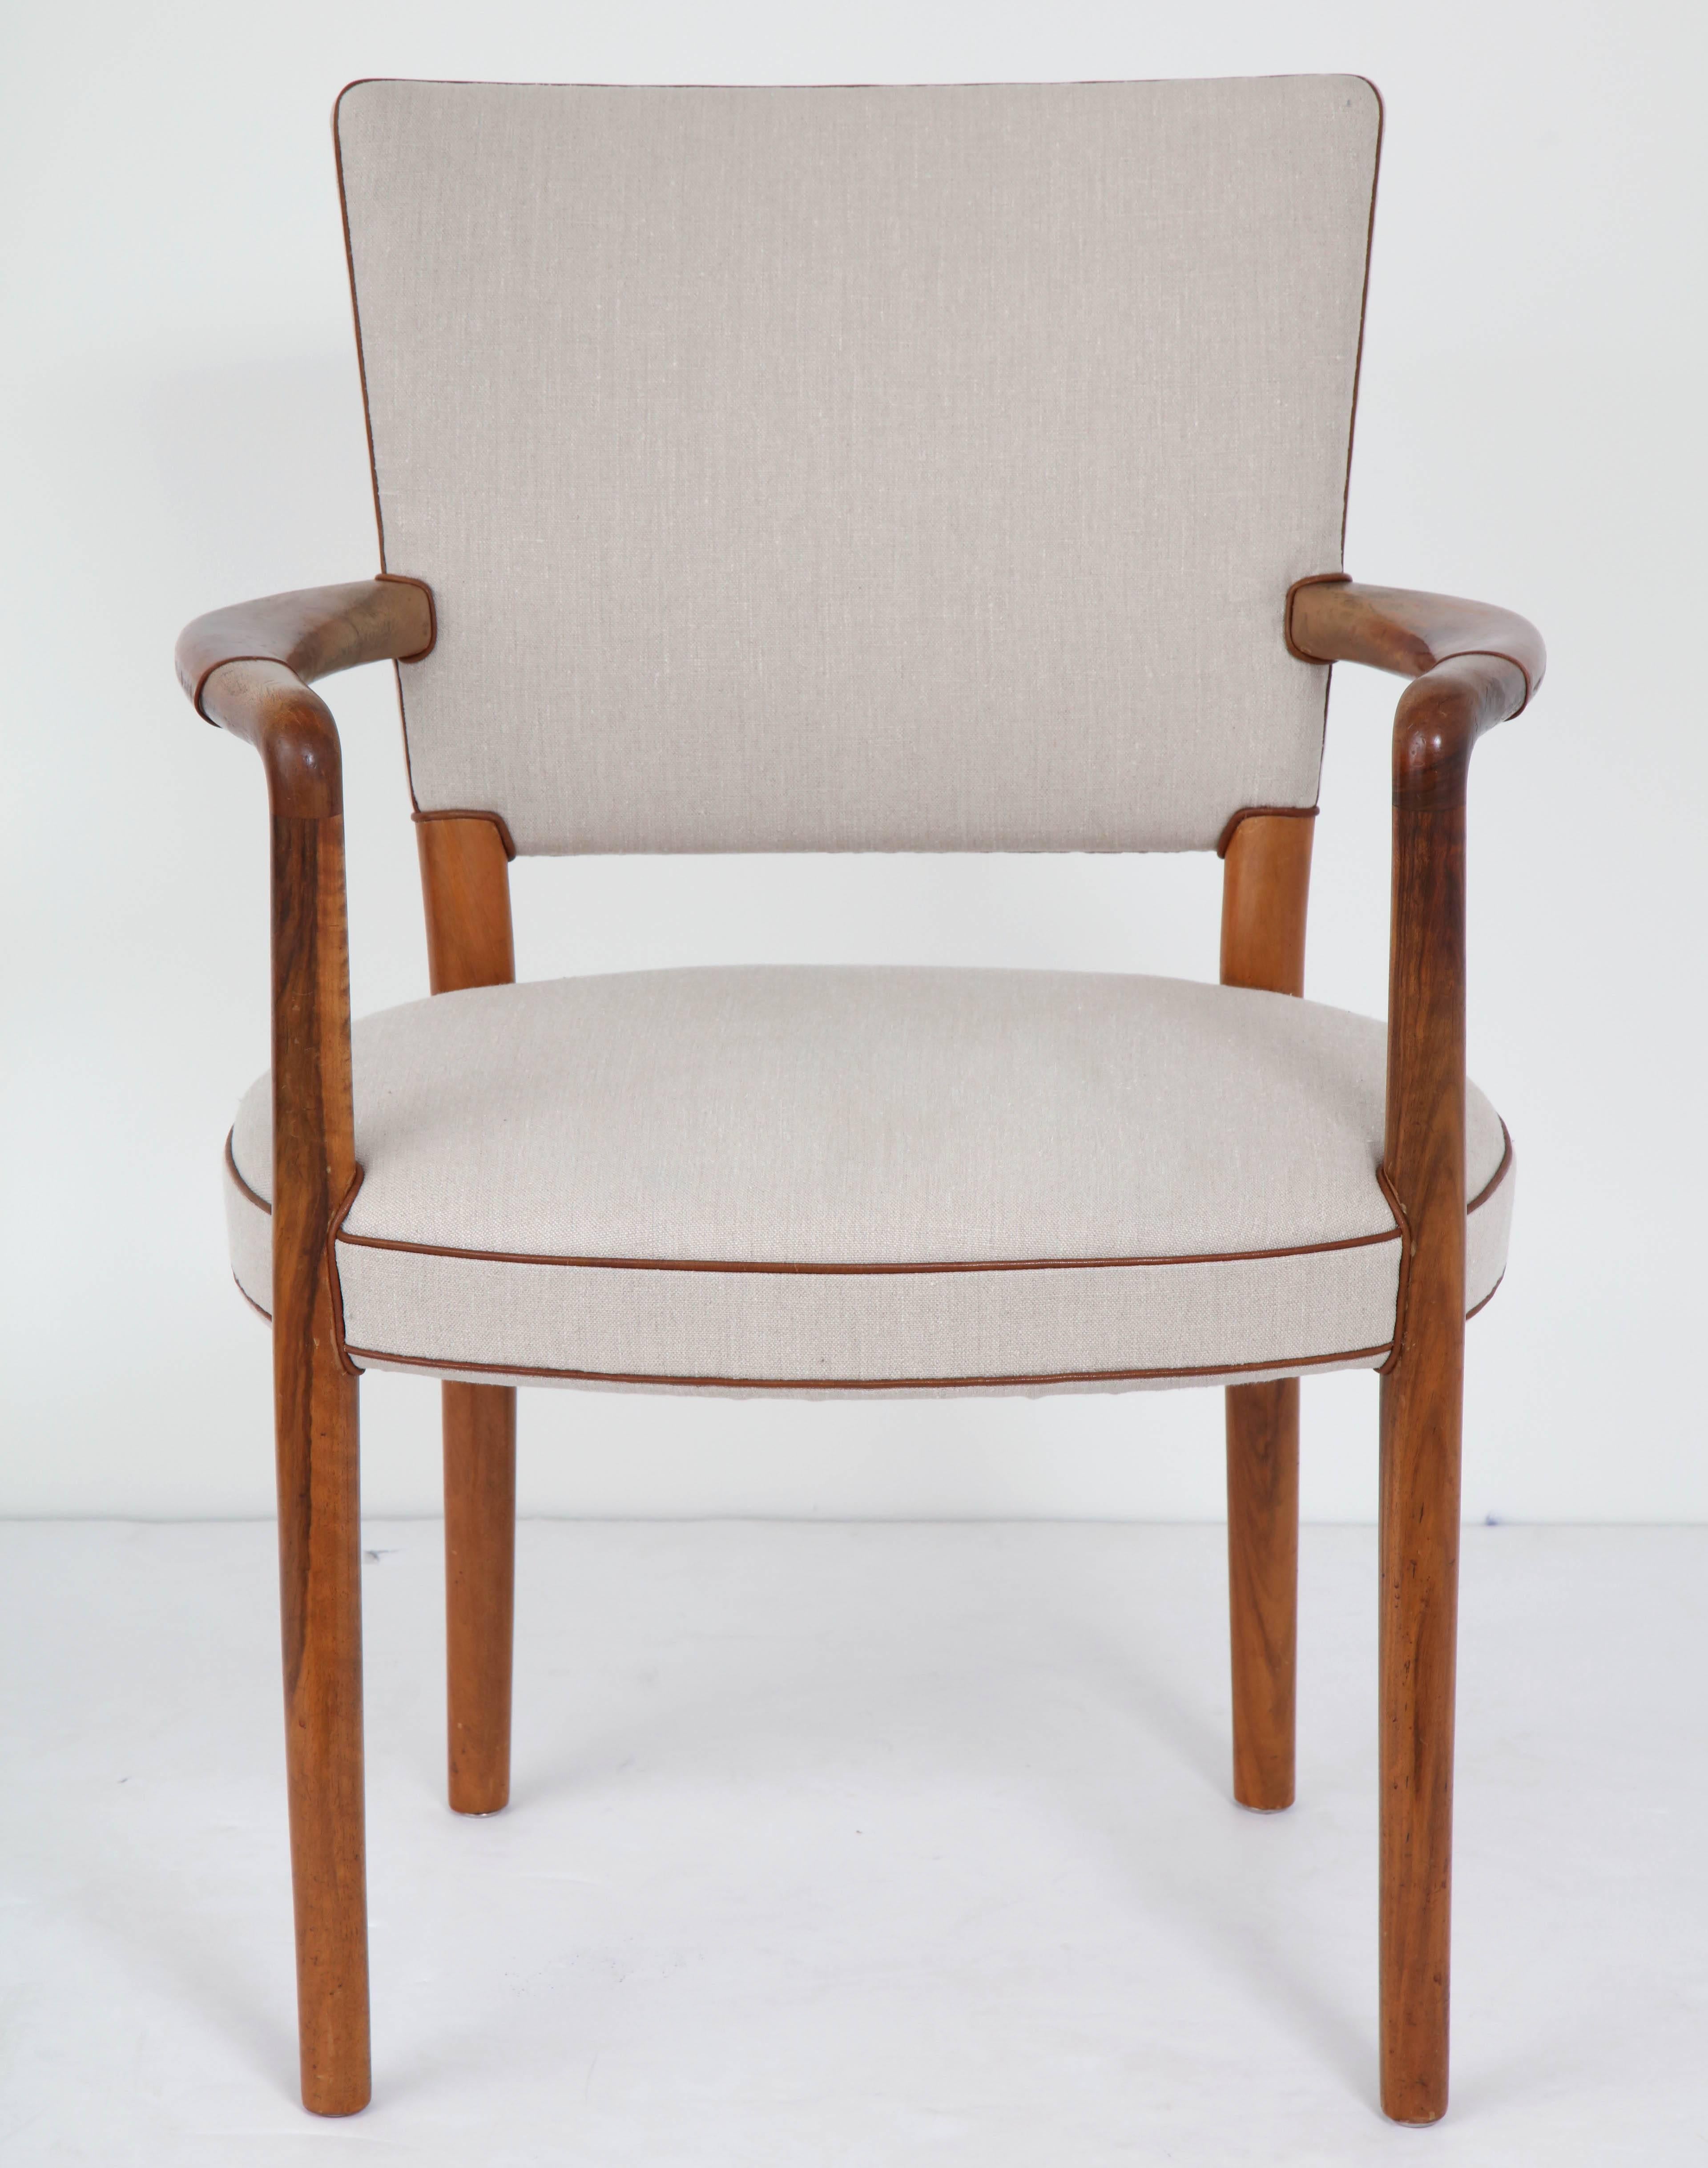 Rare Danish design chair by Flemming Lassen and Arne Jacobsen, circa 1950s, fruitwood and patinated leather with fine linen upholstery. Retaining original partially padded leather armrests. New linen. Superb patina and re-upholstered to closely